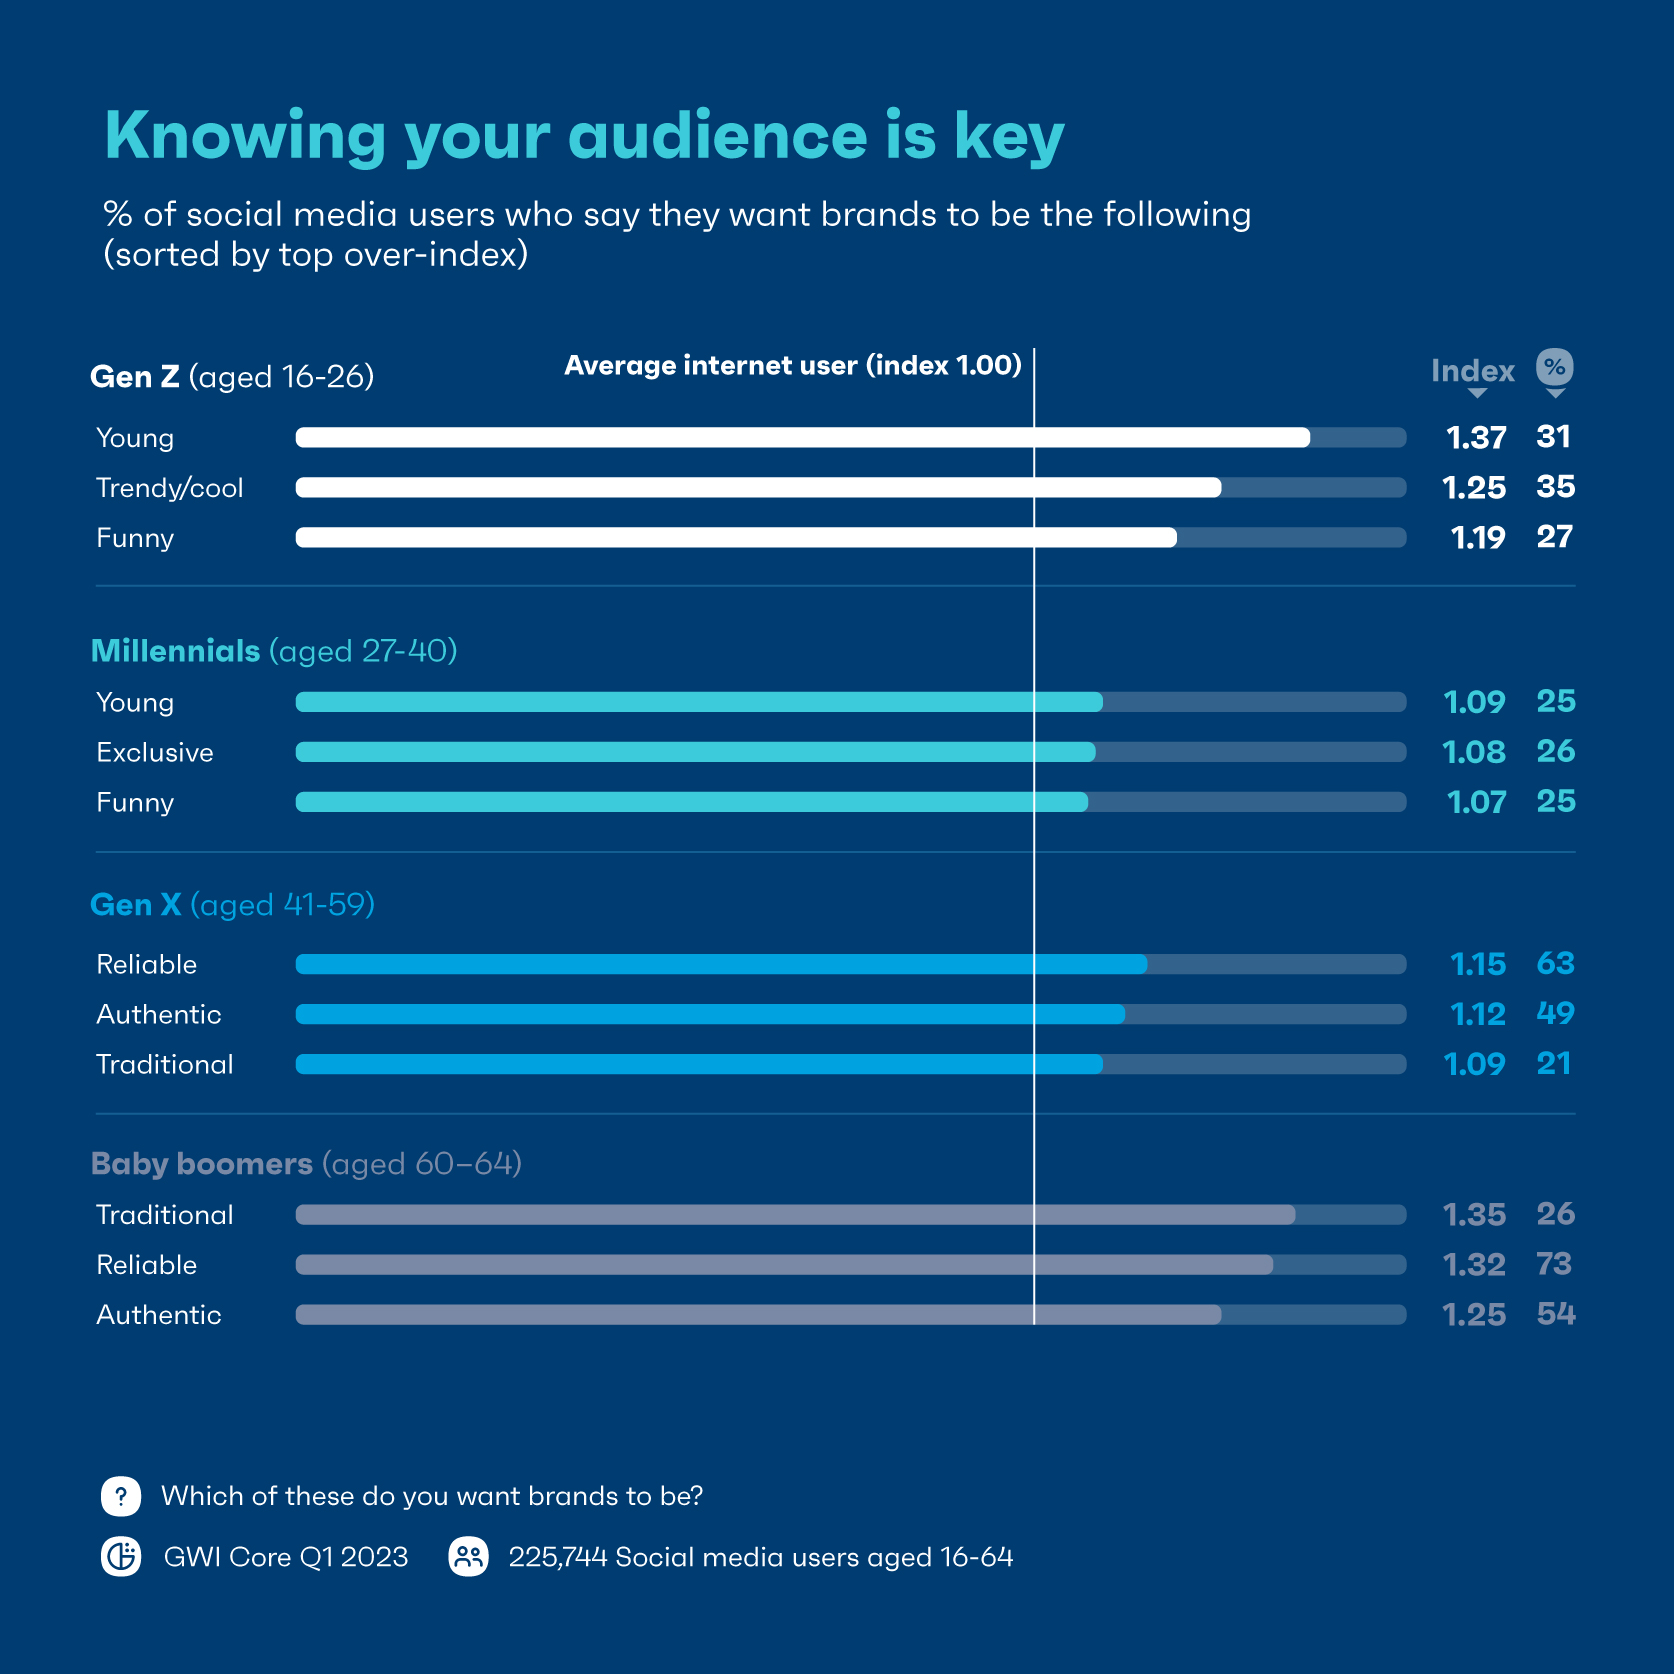 Knowing your audience is key to winning on social